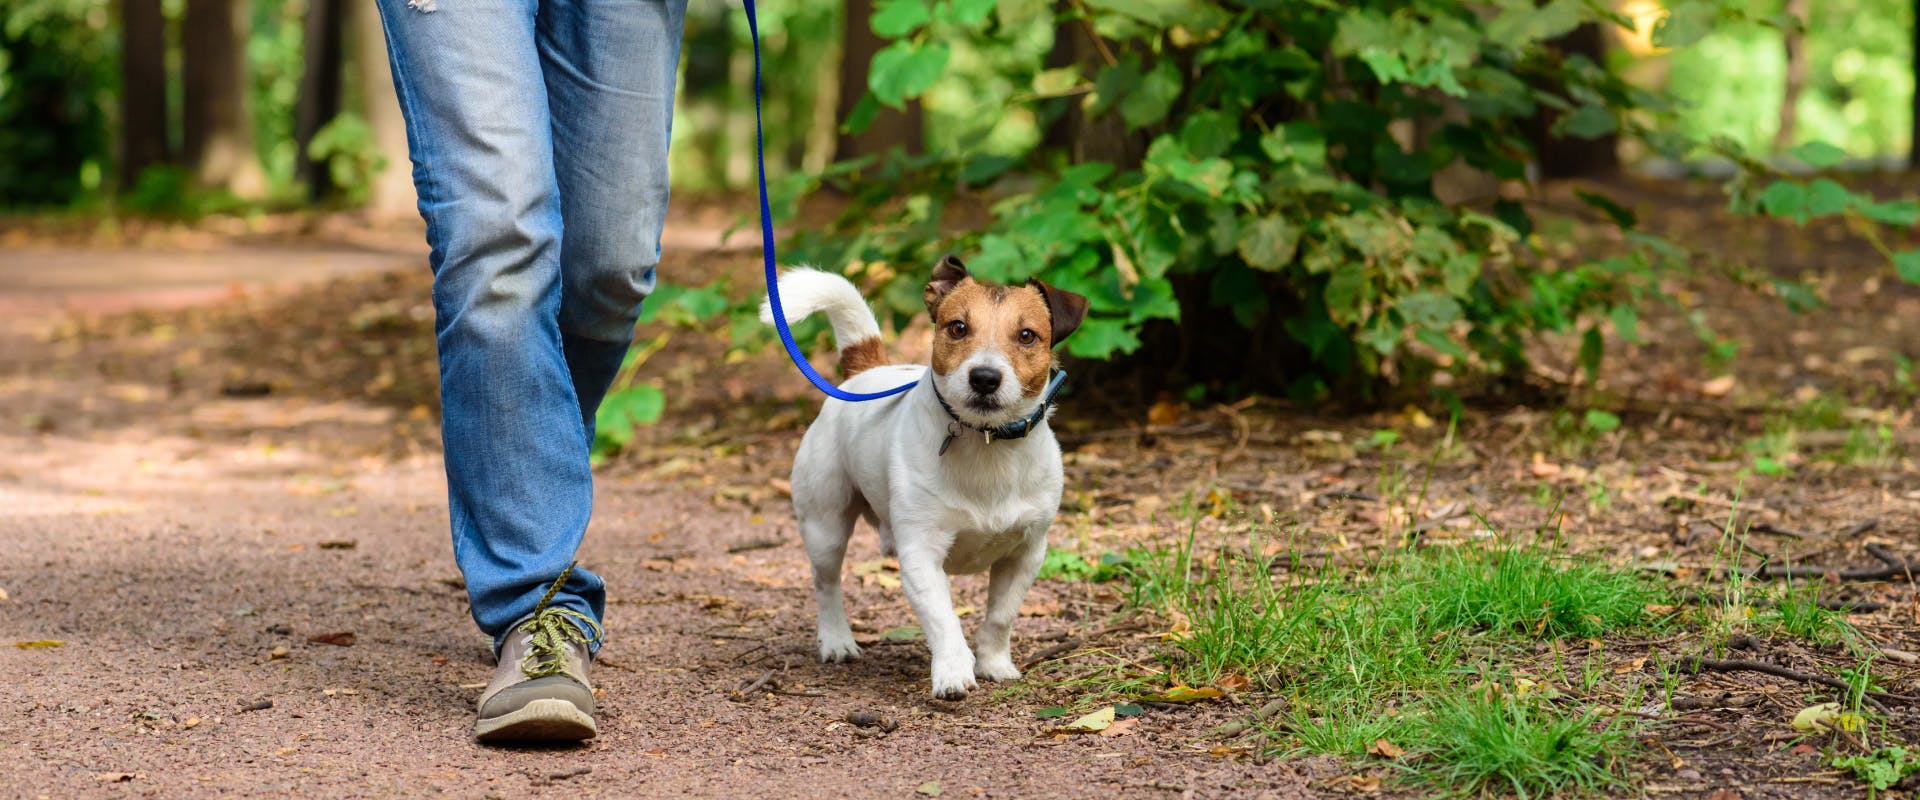 a jack russell on a walk on a woodland path with a blue leash next to a person wearing jeans